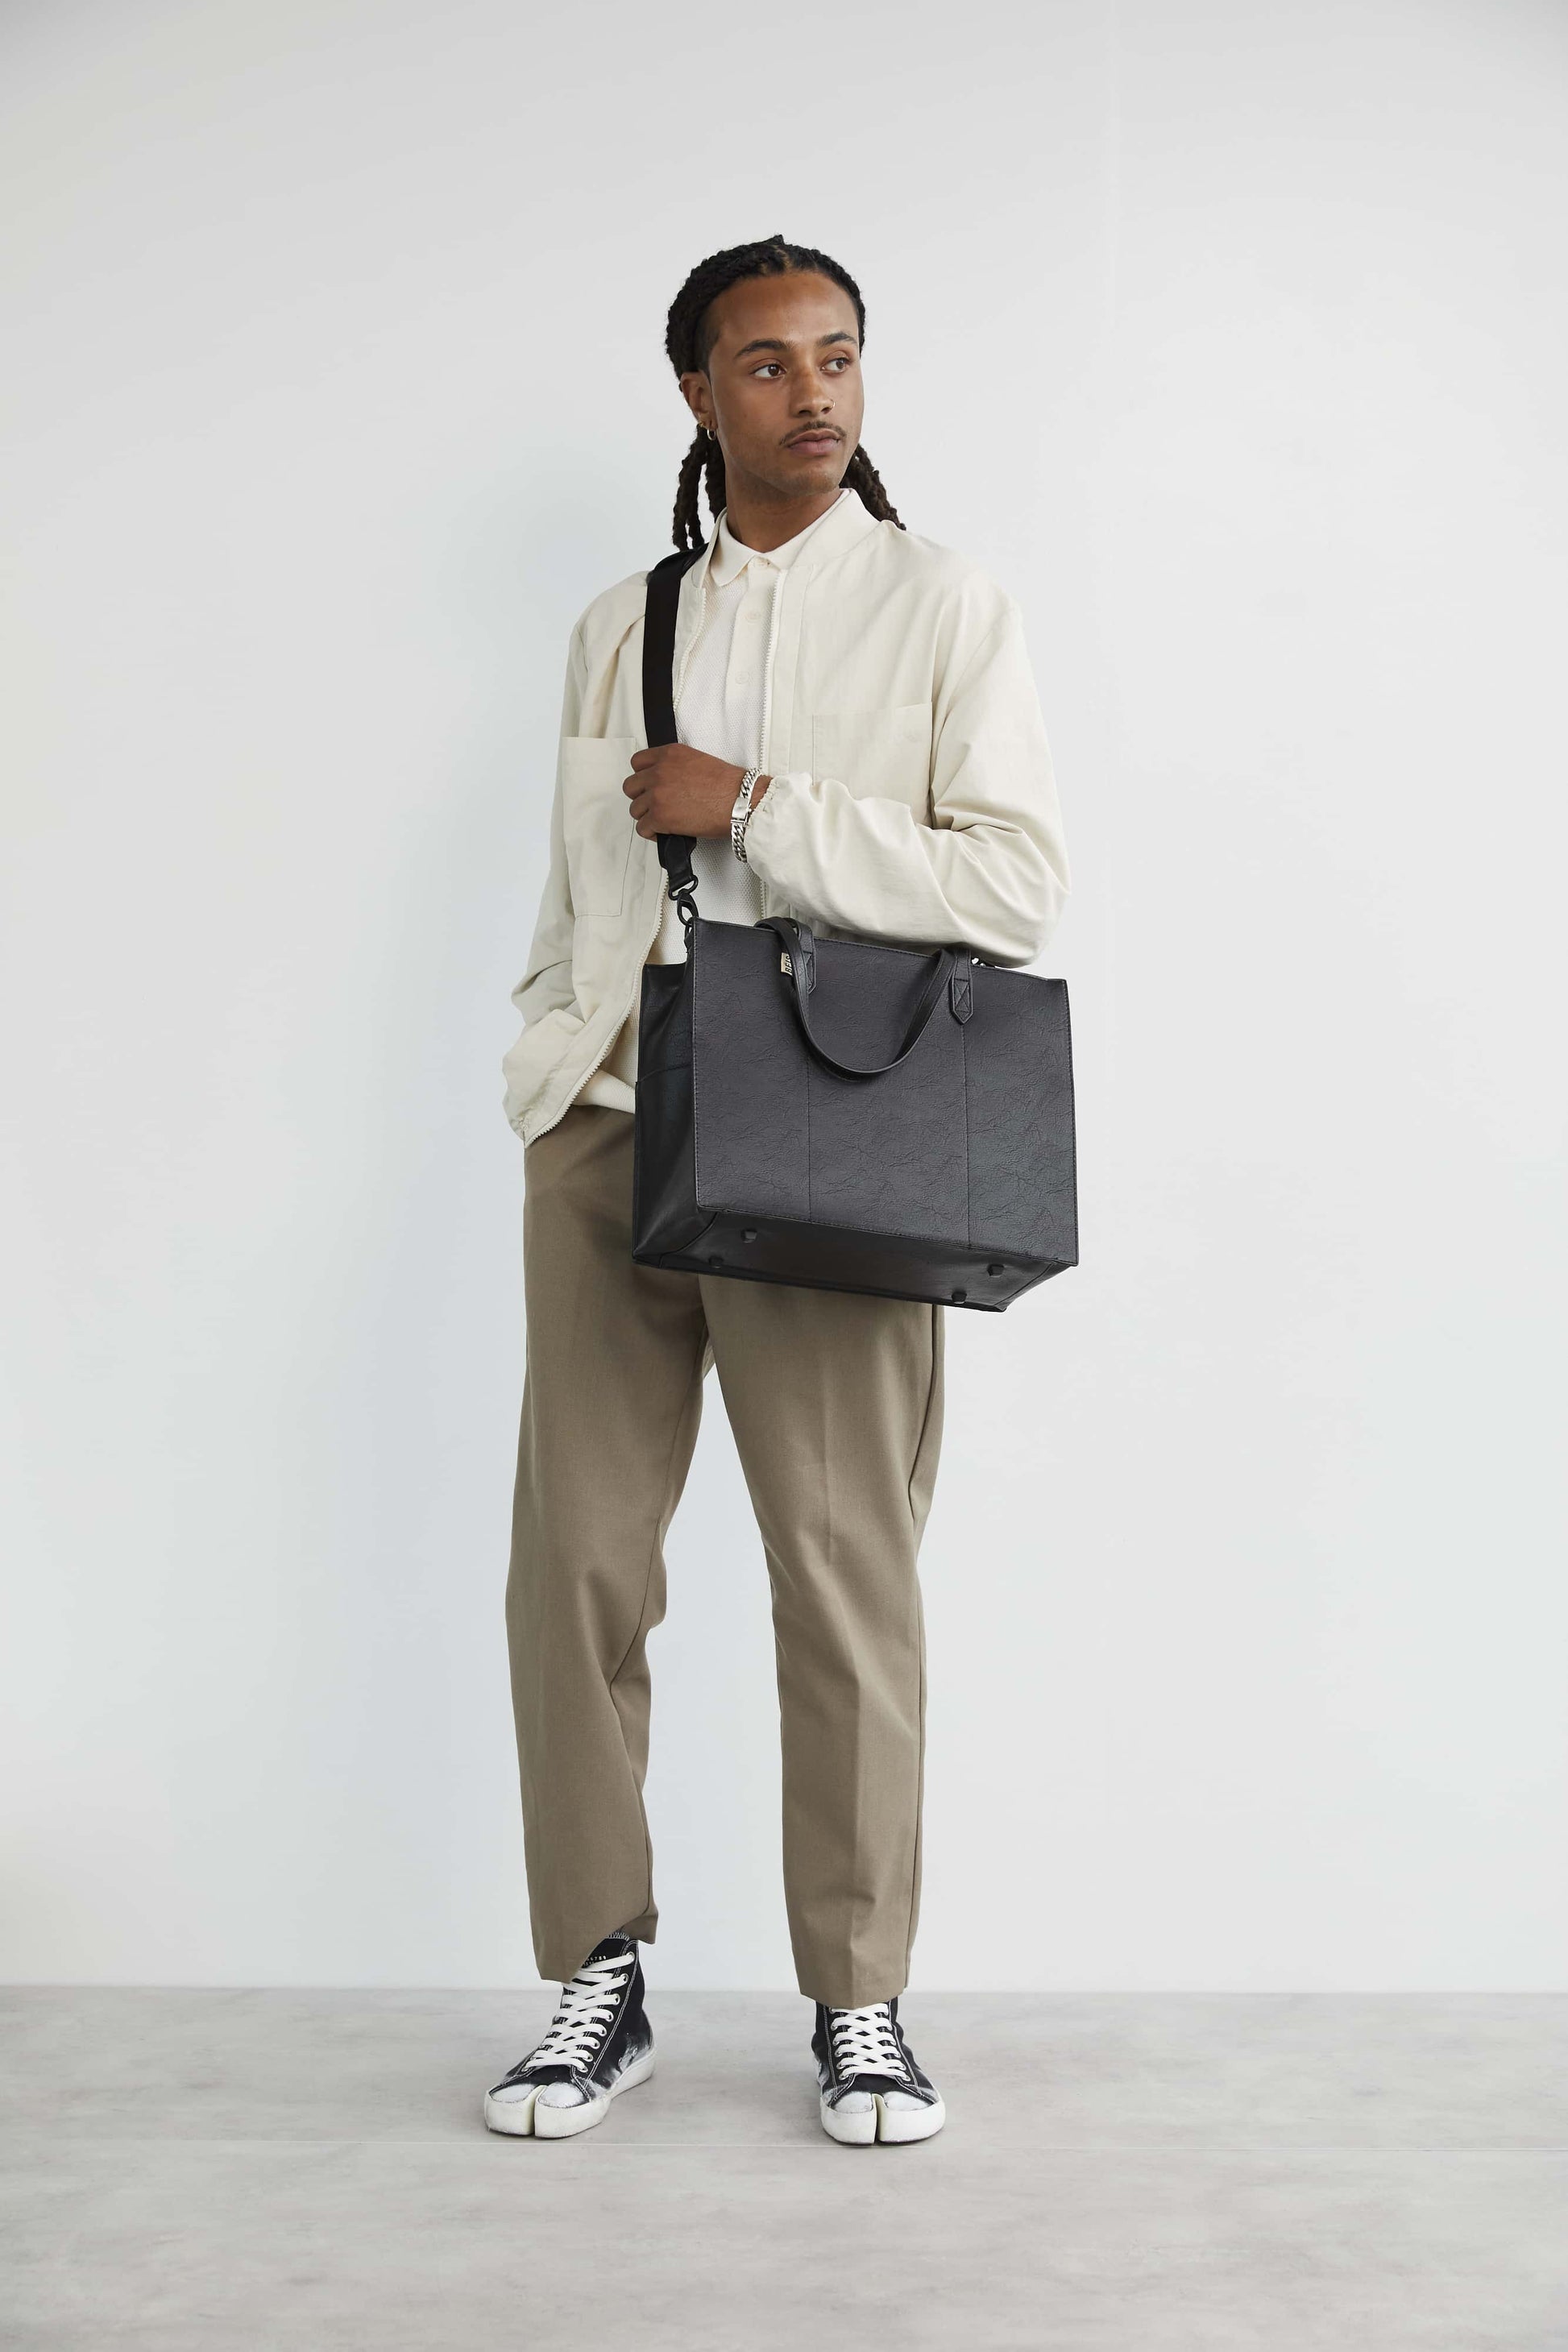 Béis 'The Work Tote' in Beige - Small Work Bag for Women & Laptop Bag